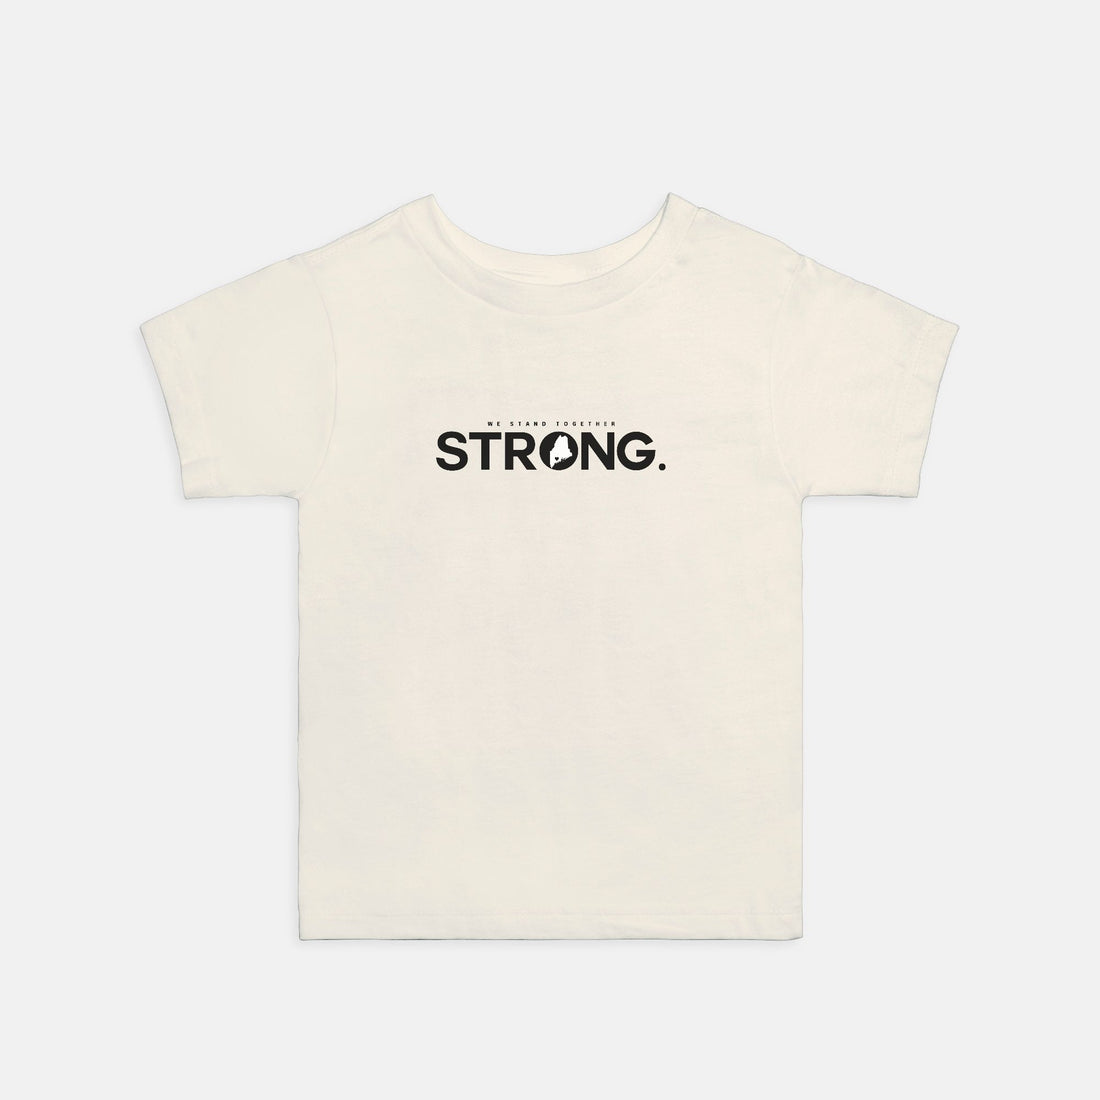 We Stand Together STRONG.  Maine Support Lewiston  Toddler Tee - ALL proceeds will go to victim funds